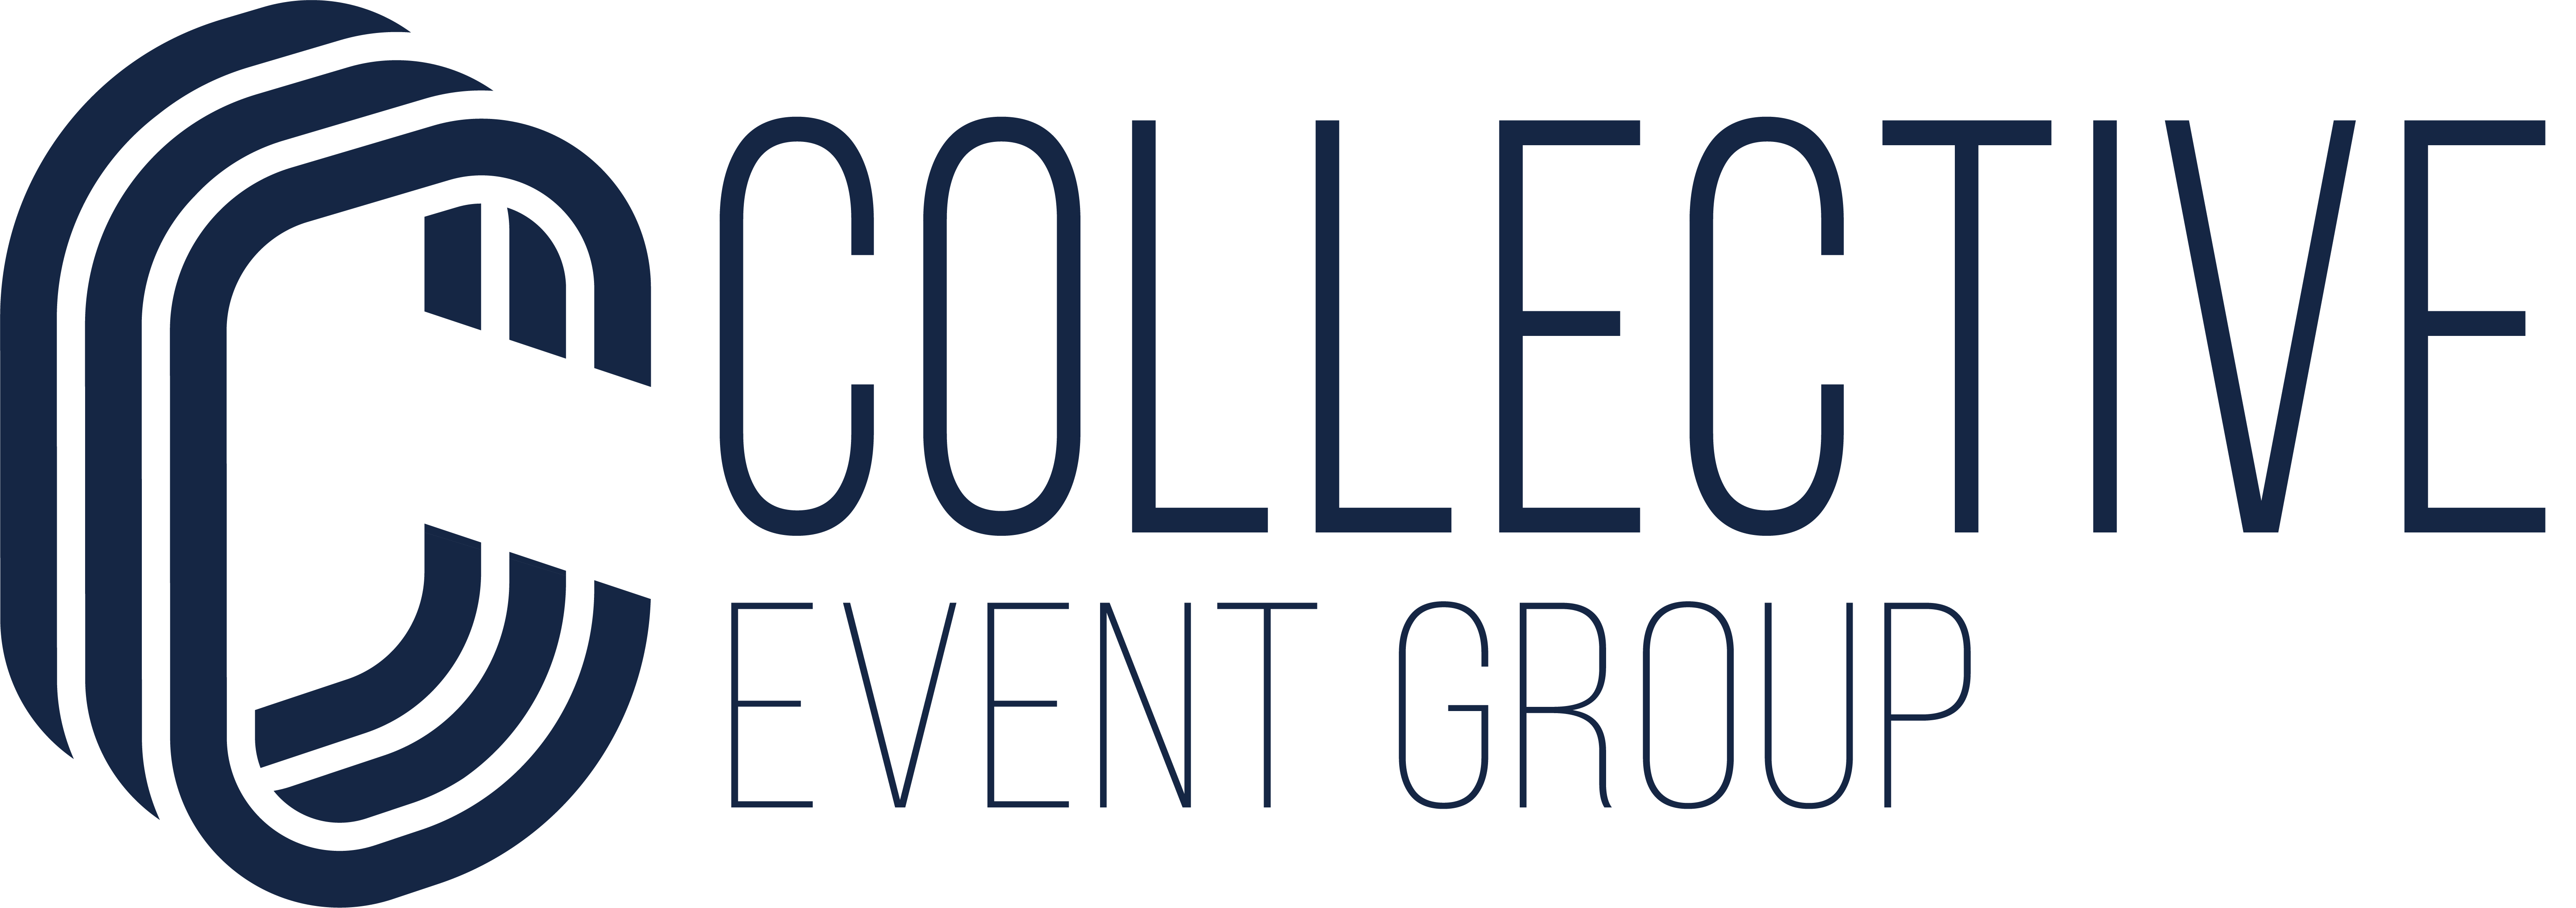 Collective Event Group